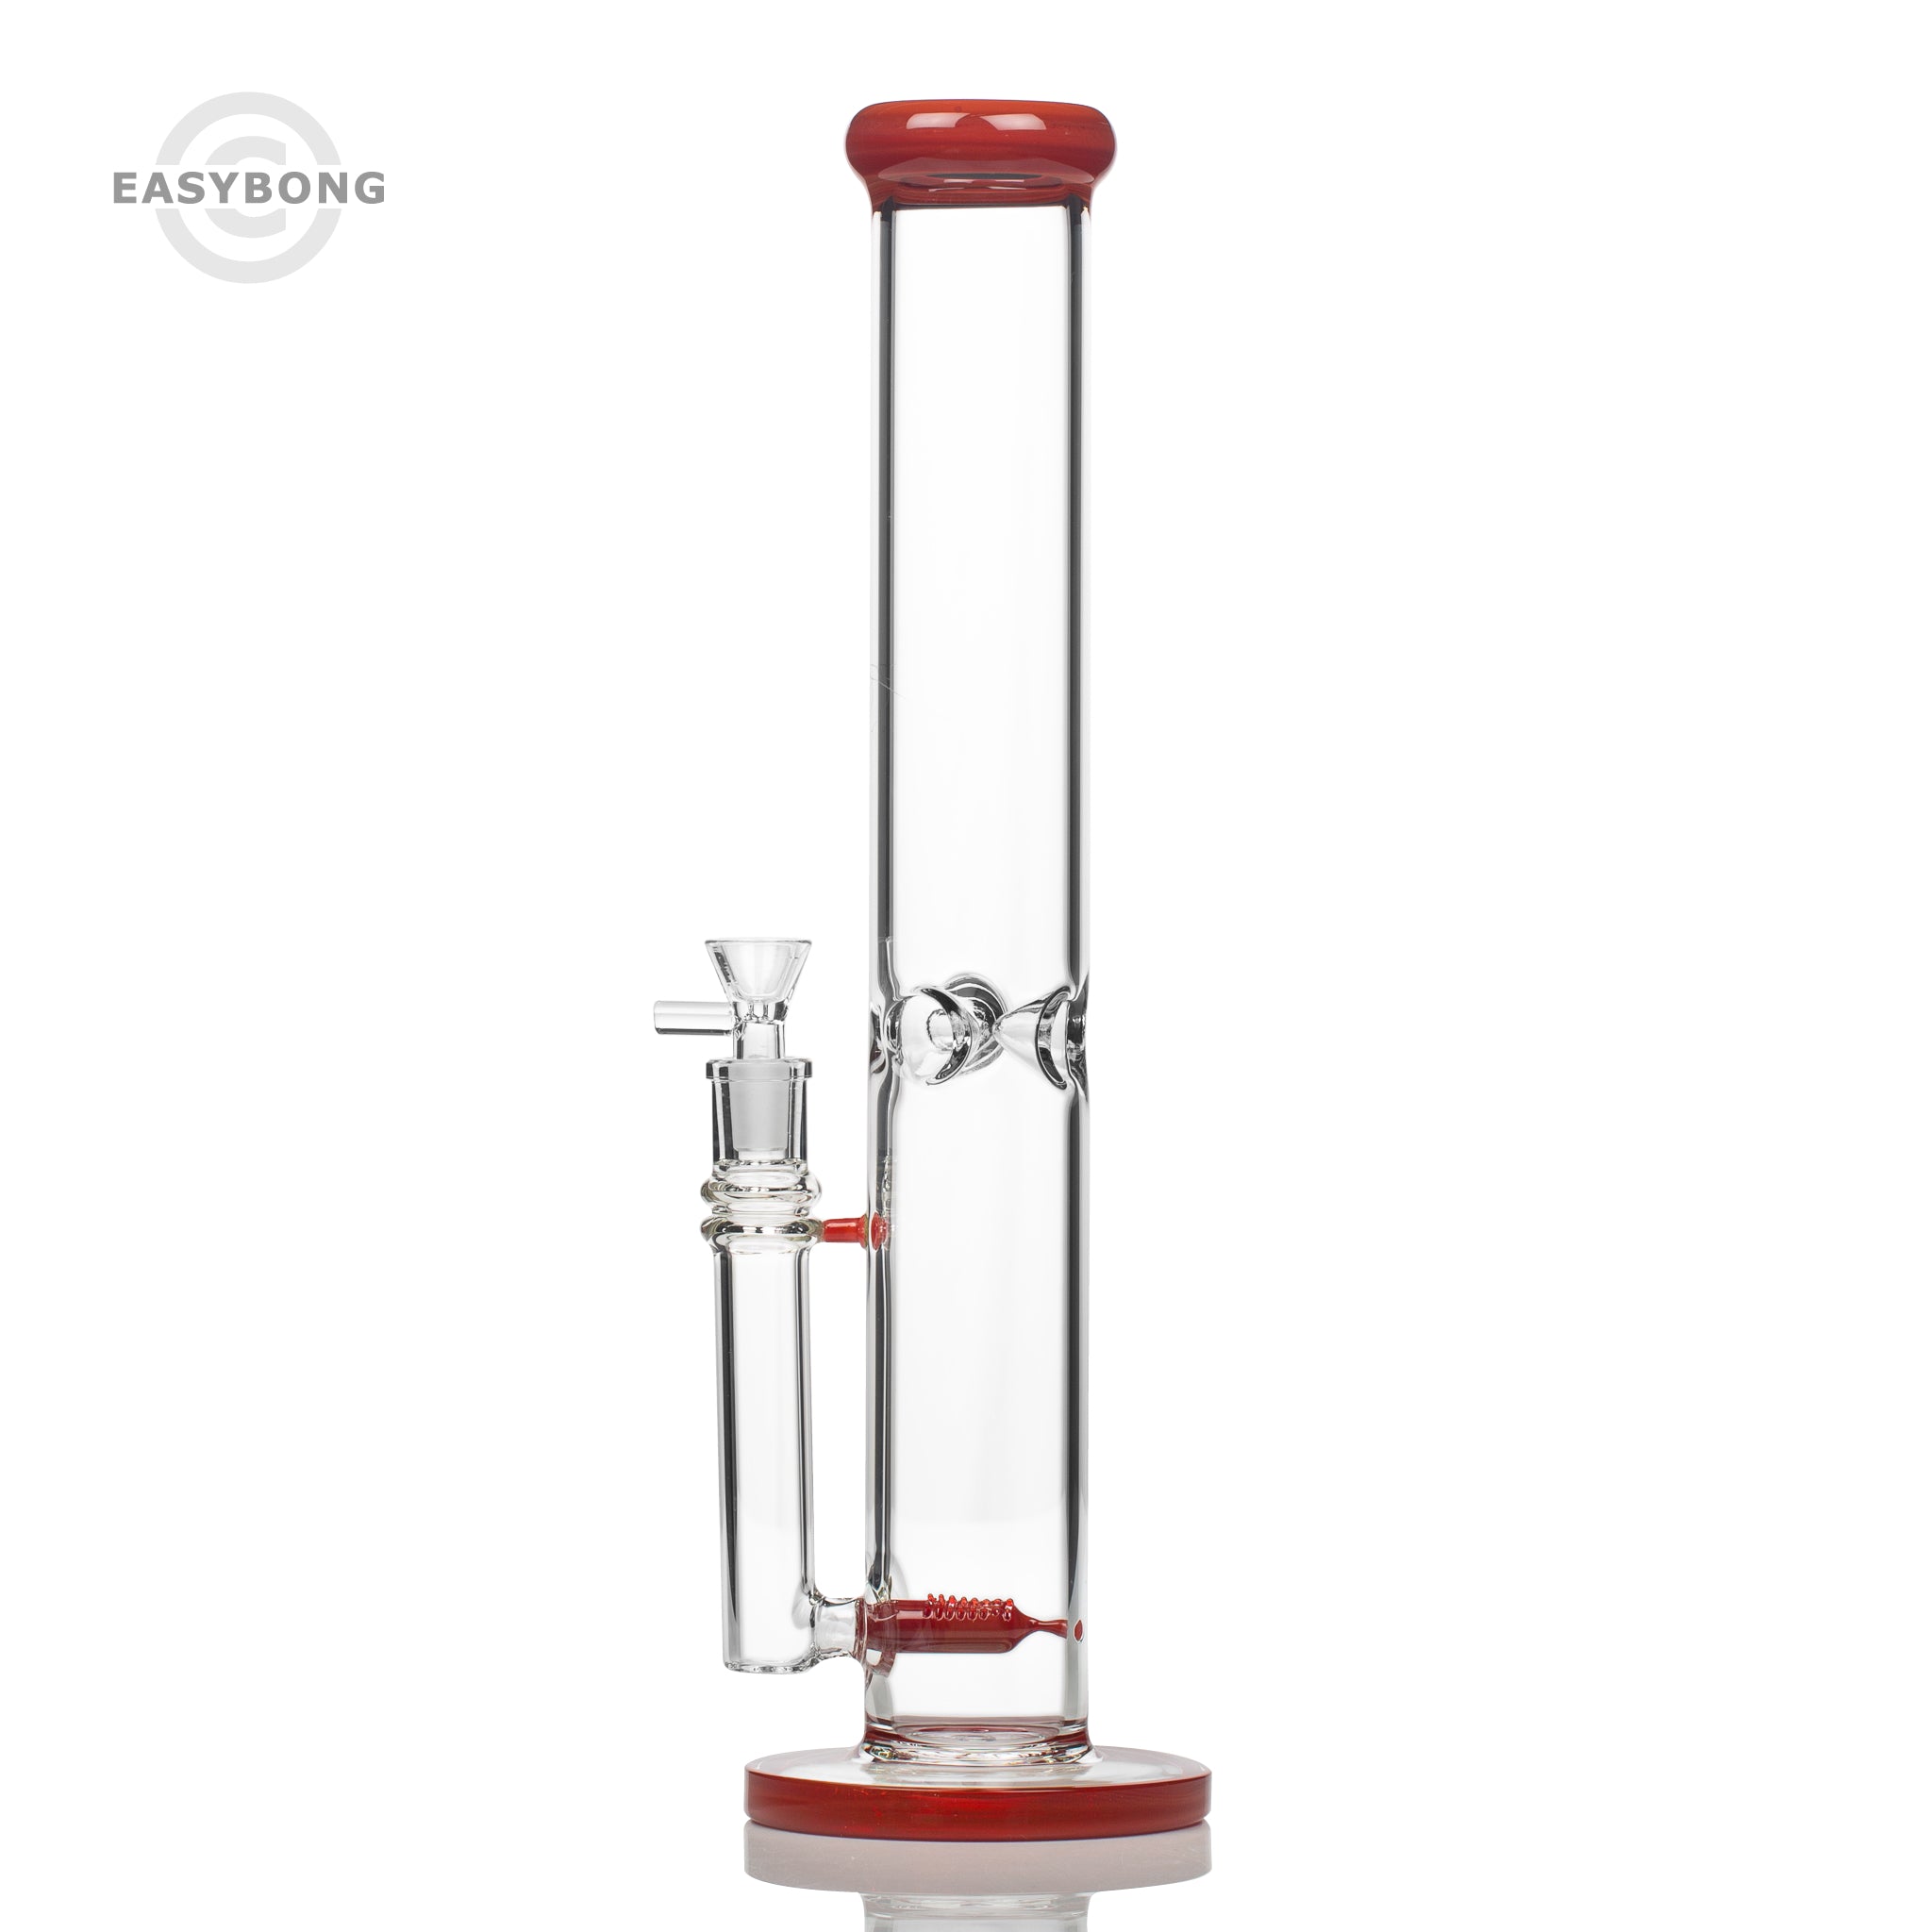 Straight glass bongs with inline perc for a smoother smoking experience.